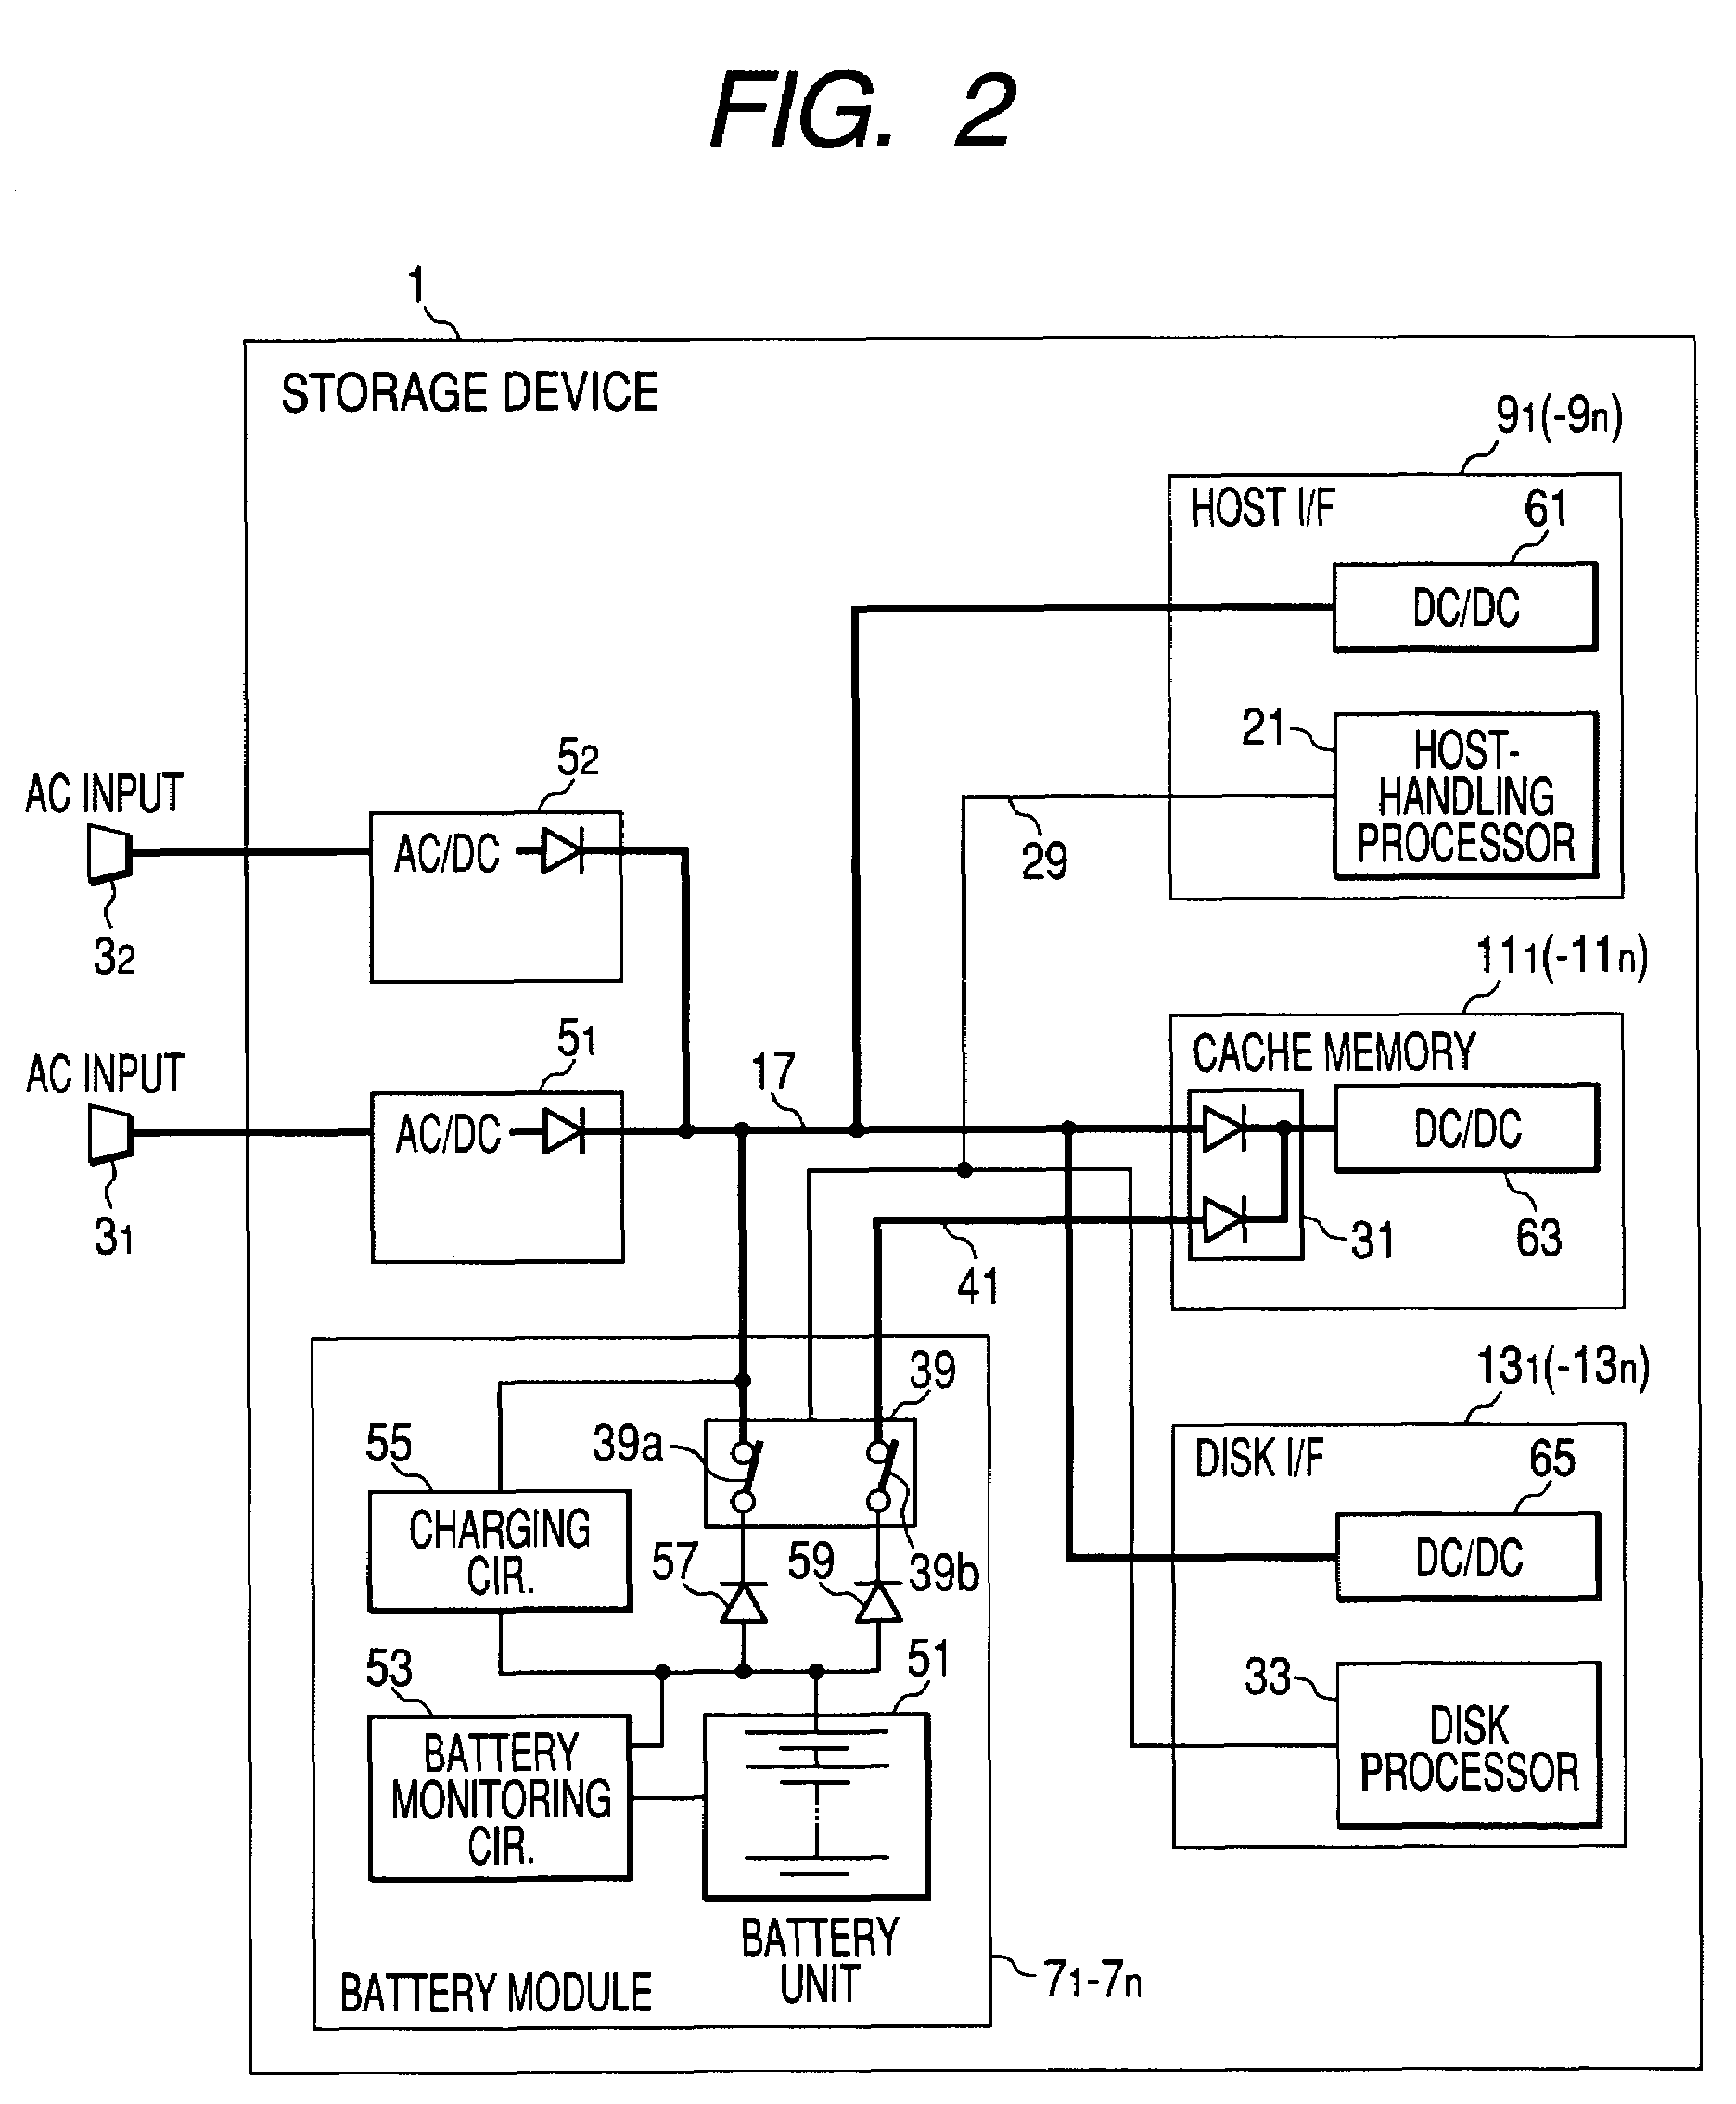 Backup power supply device for a storage device